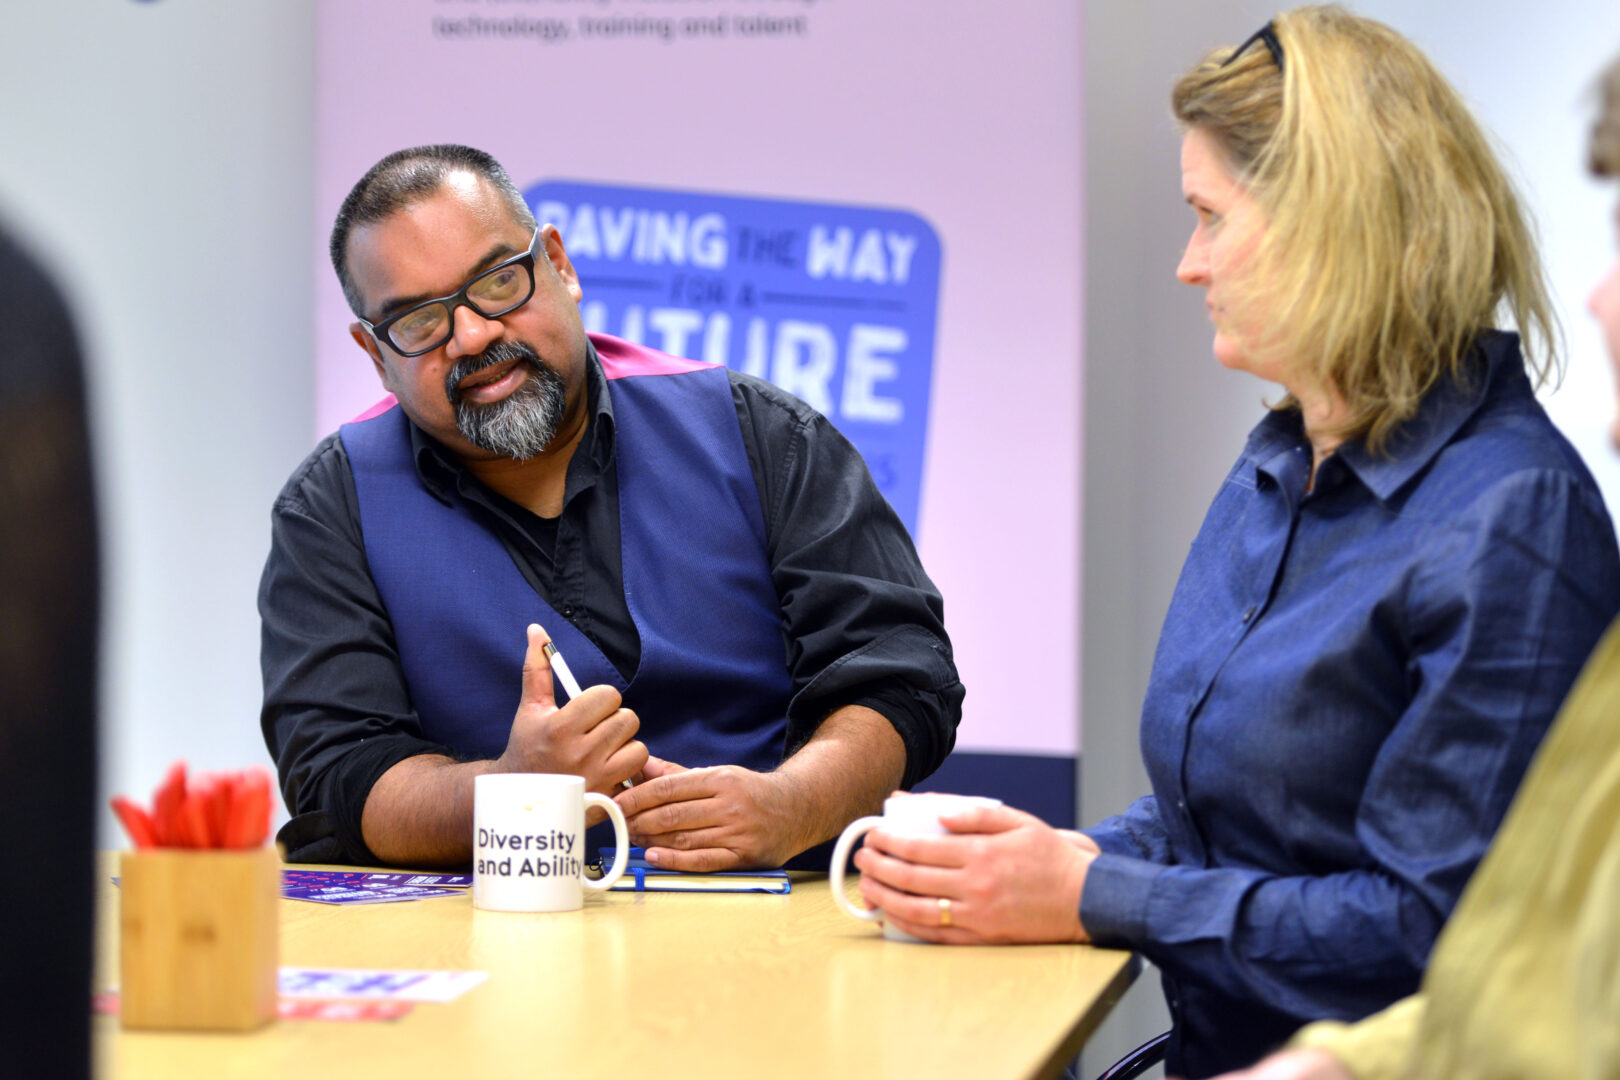 Members of the D&A team around a table in the office. In focus is Atif, a brown man wearing glasses, a black shirt and blue waistcoat. He is speaking and looking intently at Giedre, a white woman with blonde straight hair, who is sat to his right.